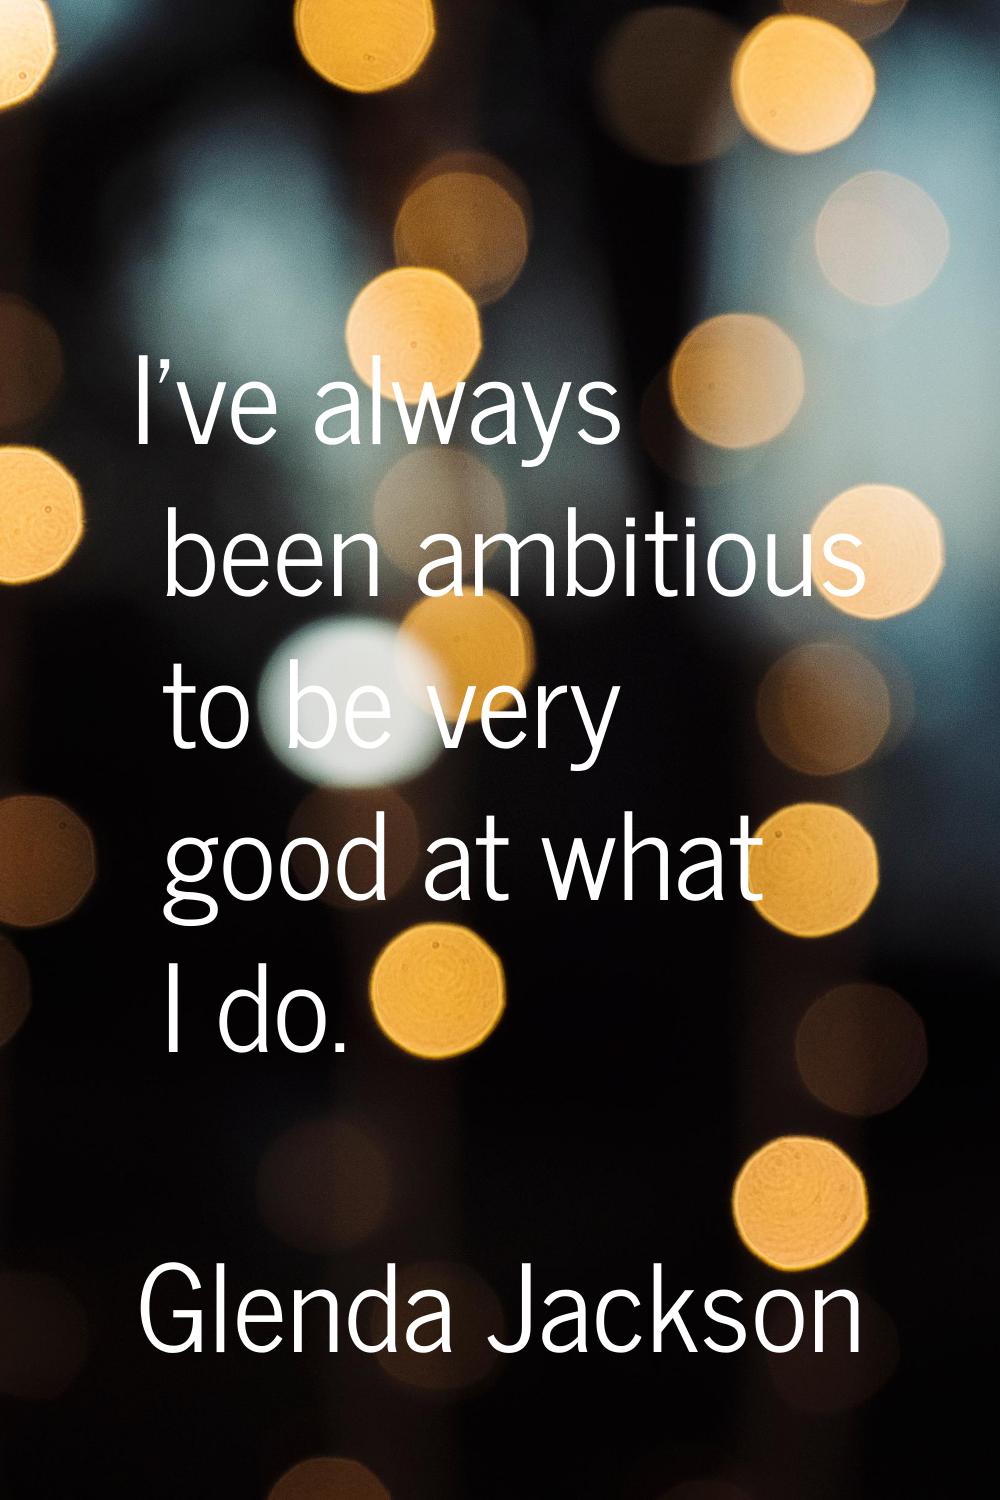 I've always been ambitious to be very good at what I do.